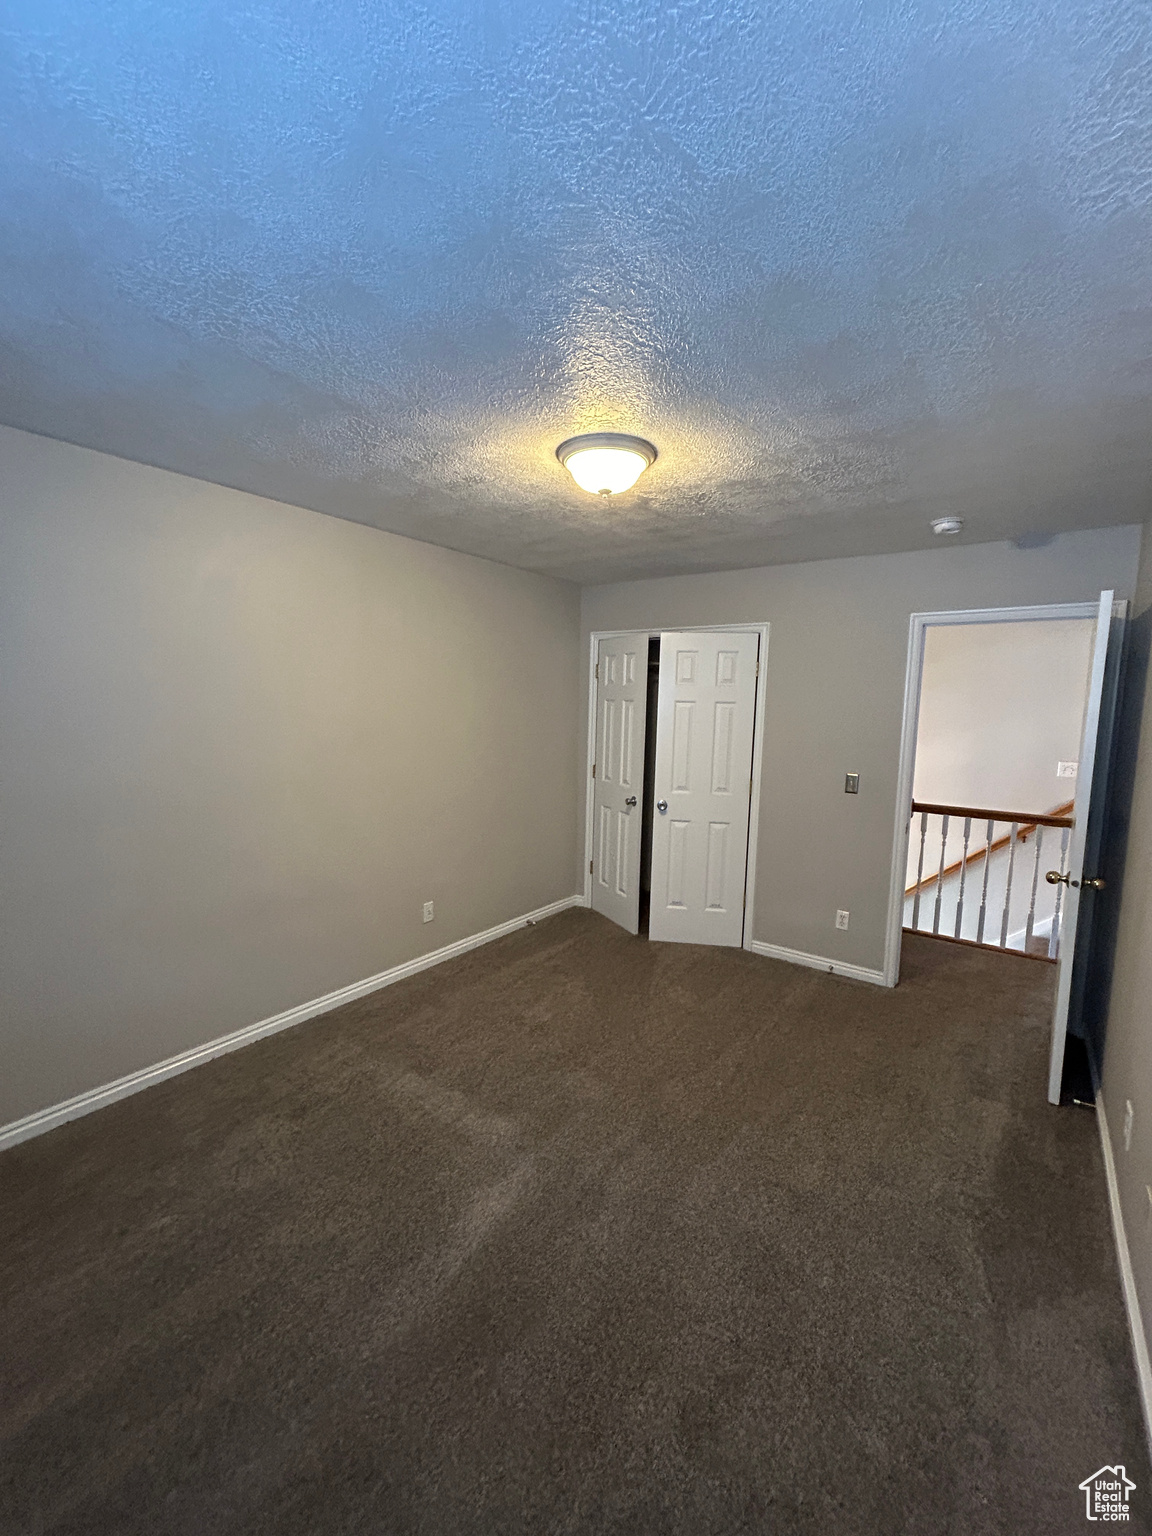 3rd Bedroom with dark carpet and a textured ceiling